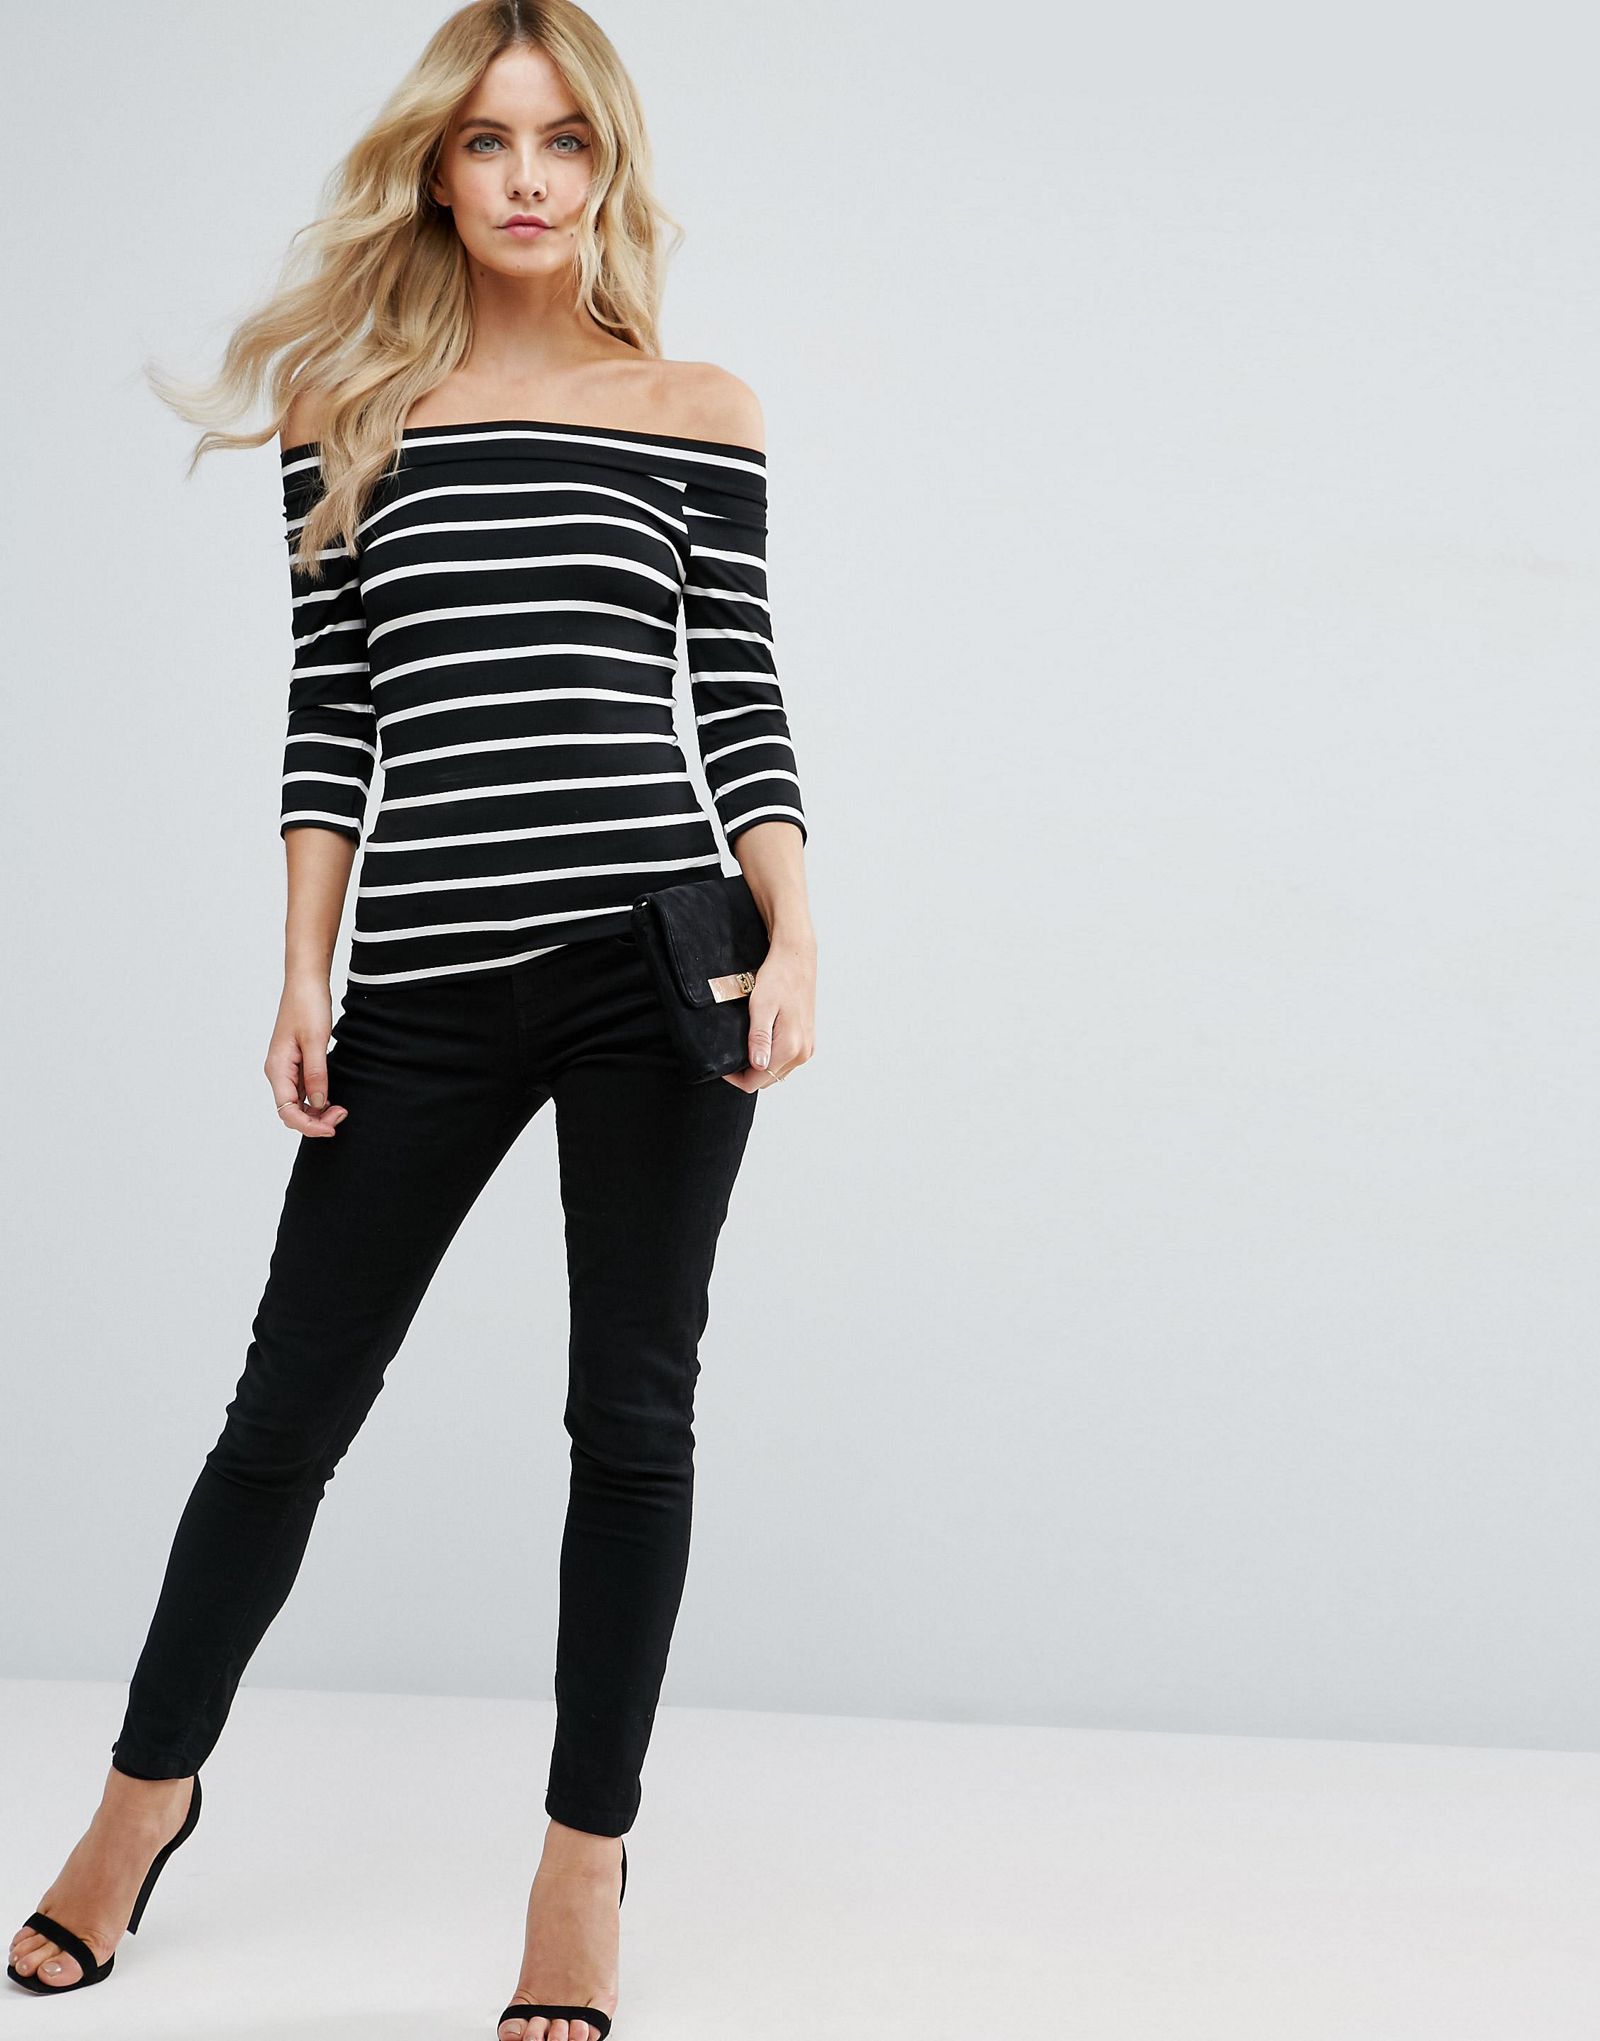 ASOS PETITE Stripe Top With Bardot Neck And 3/4 Sleeves